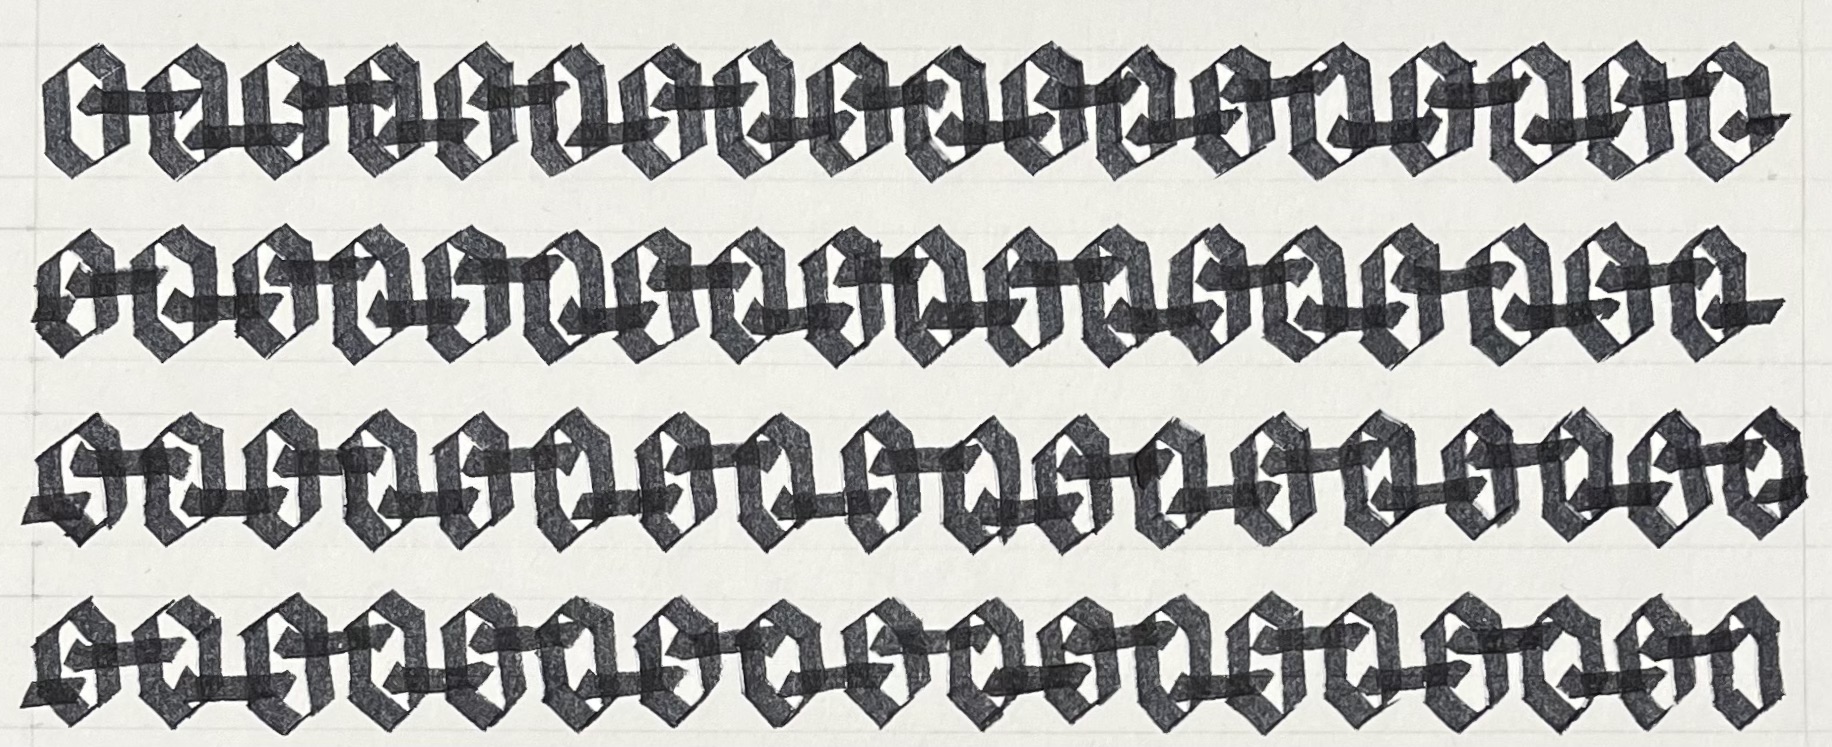 A pen and ink drawing of a series of calligraphic blackletter lower-case "O"s connected by horizontal lines.